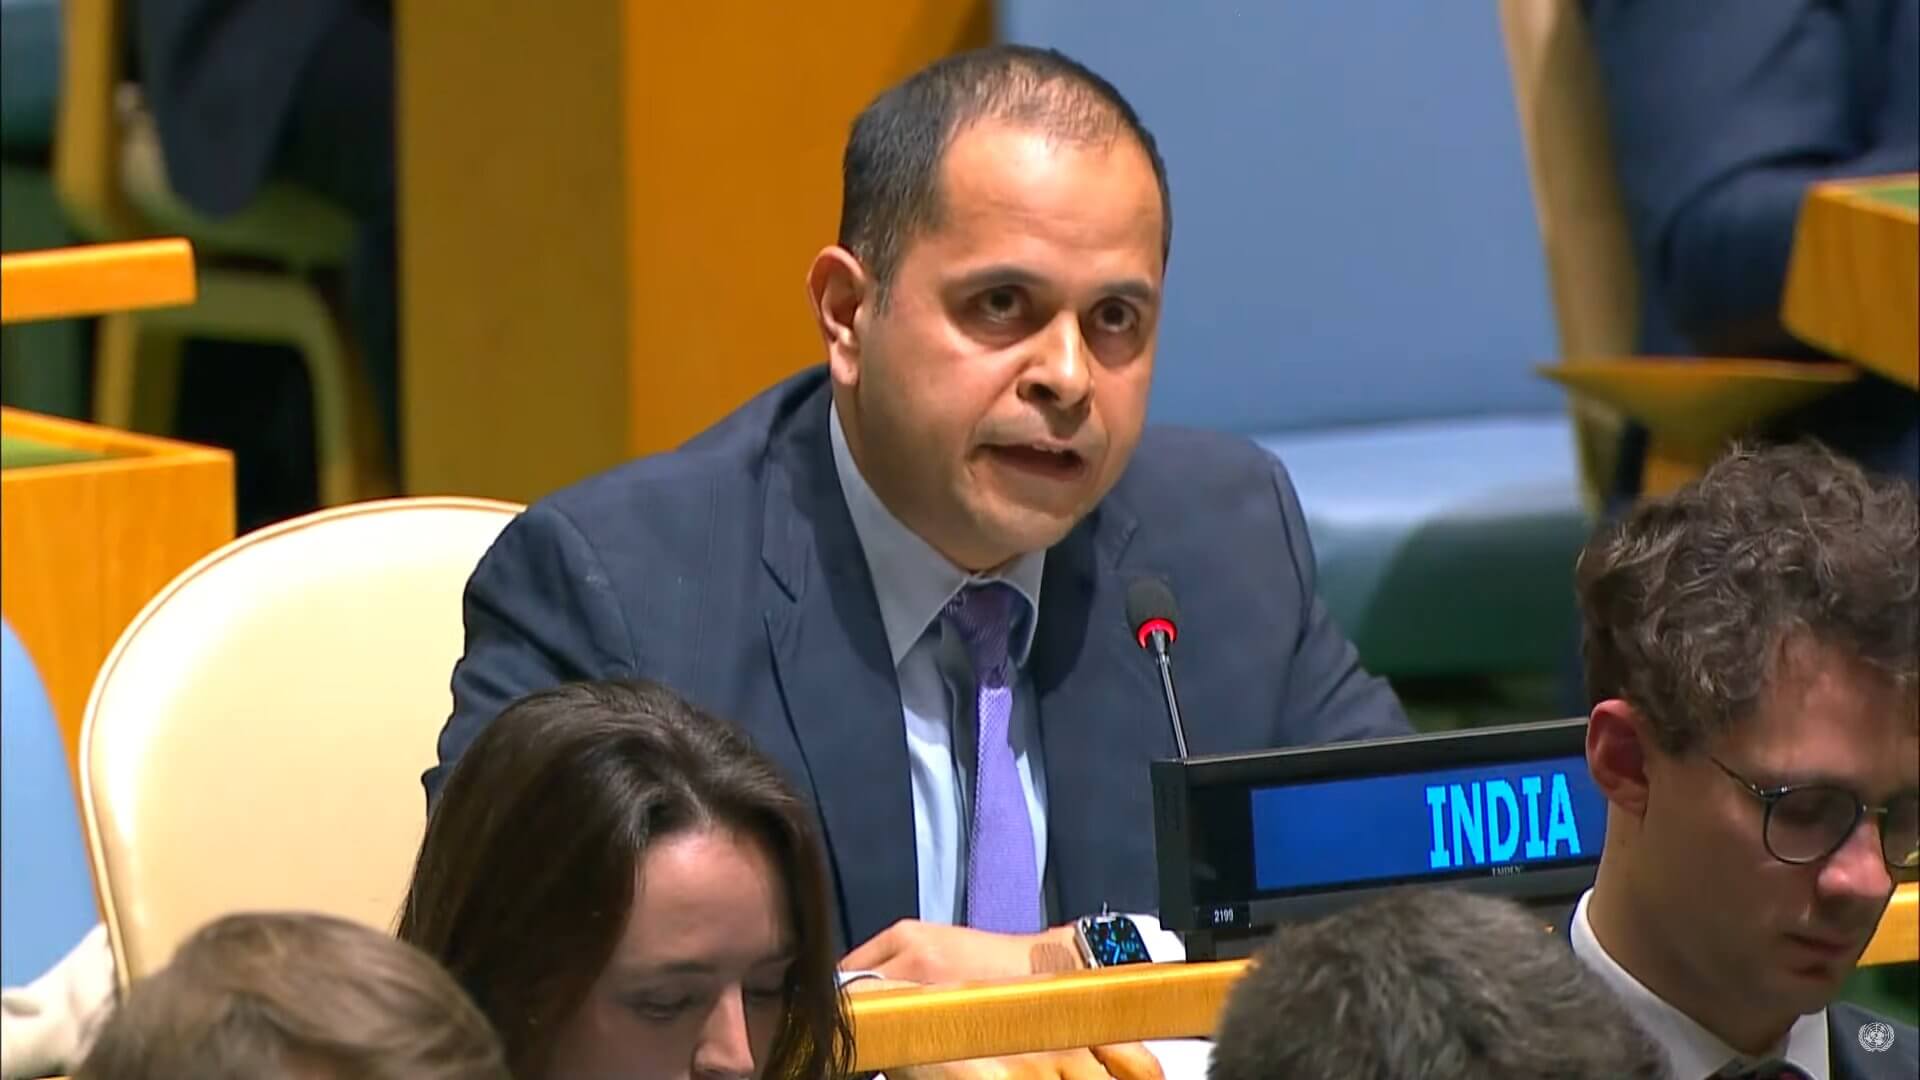 UNSC Driven by Political Aims not “Moral Obligations”: India at UNGA